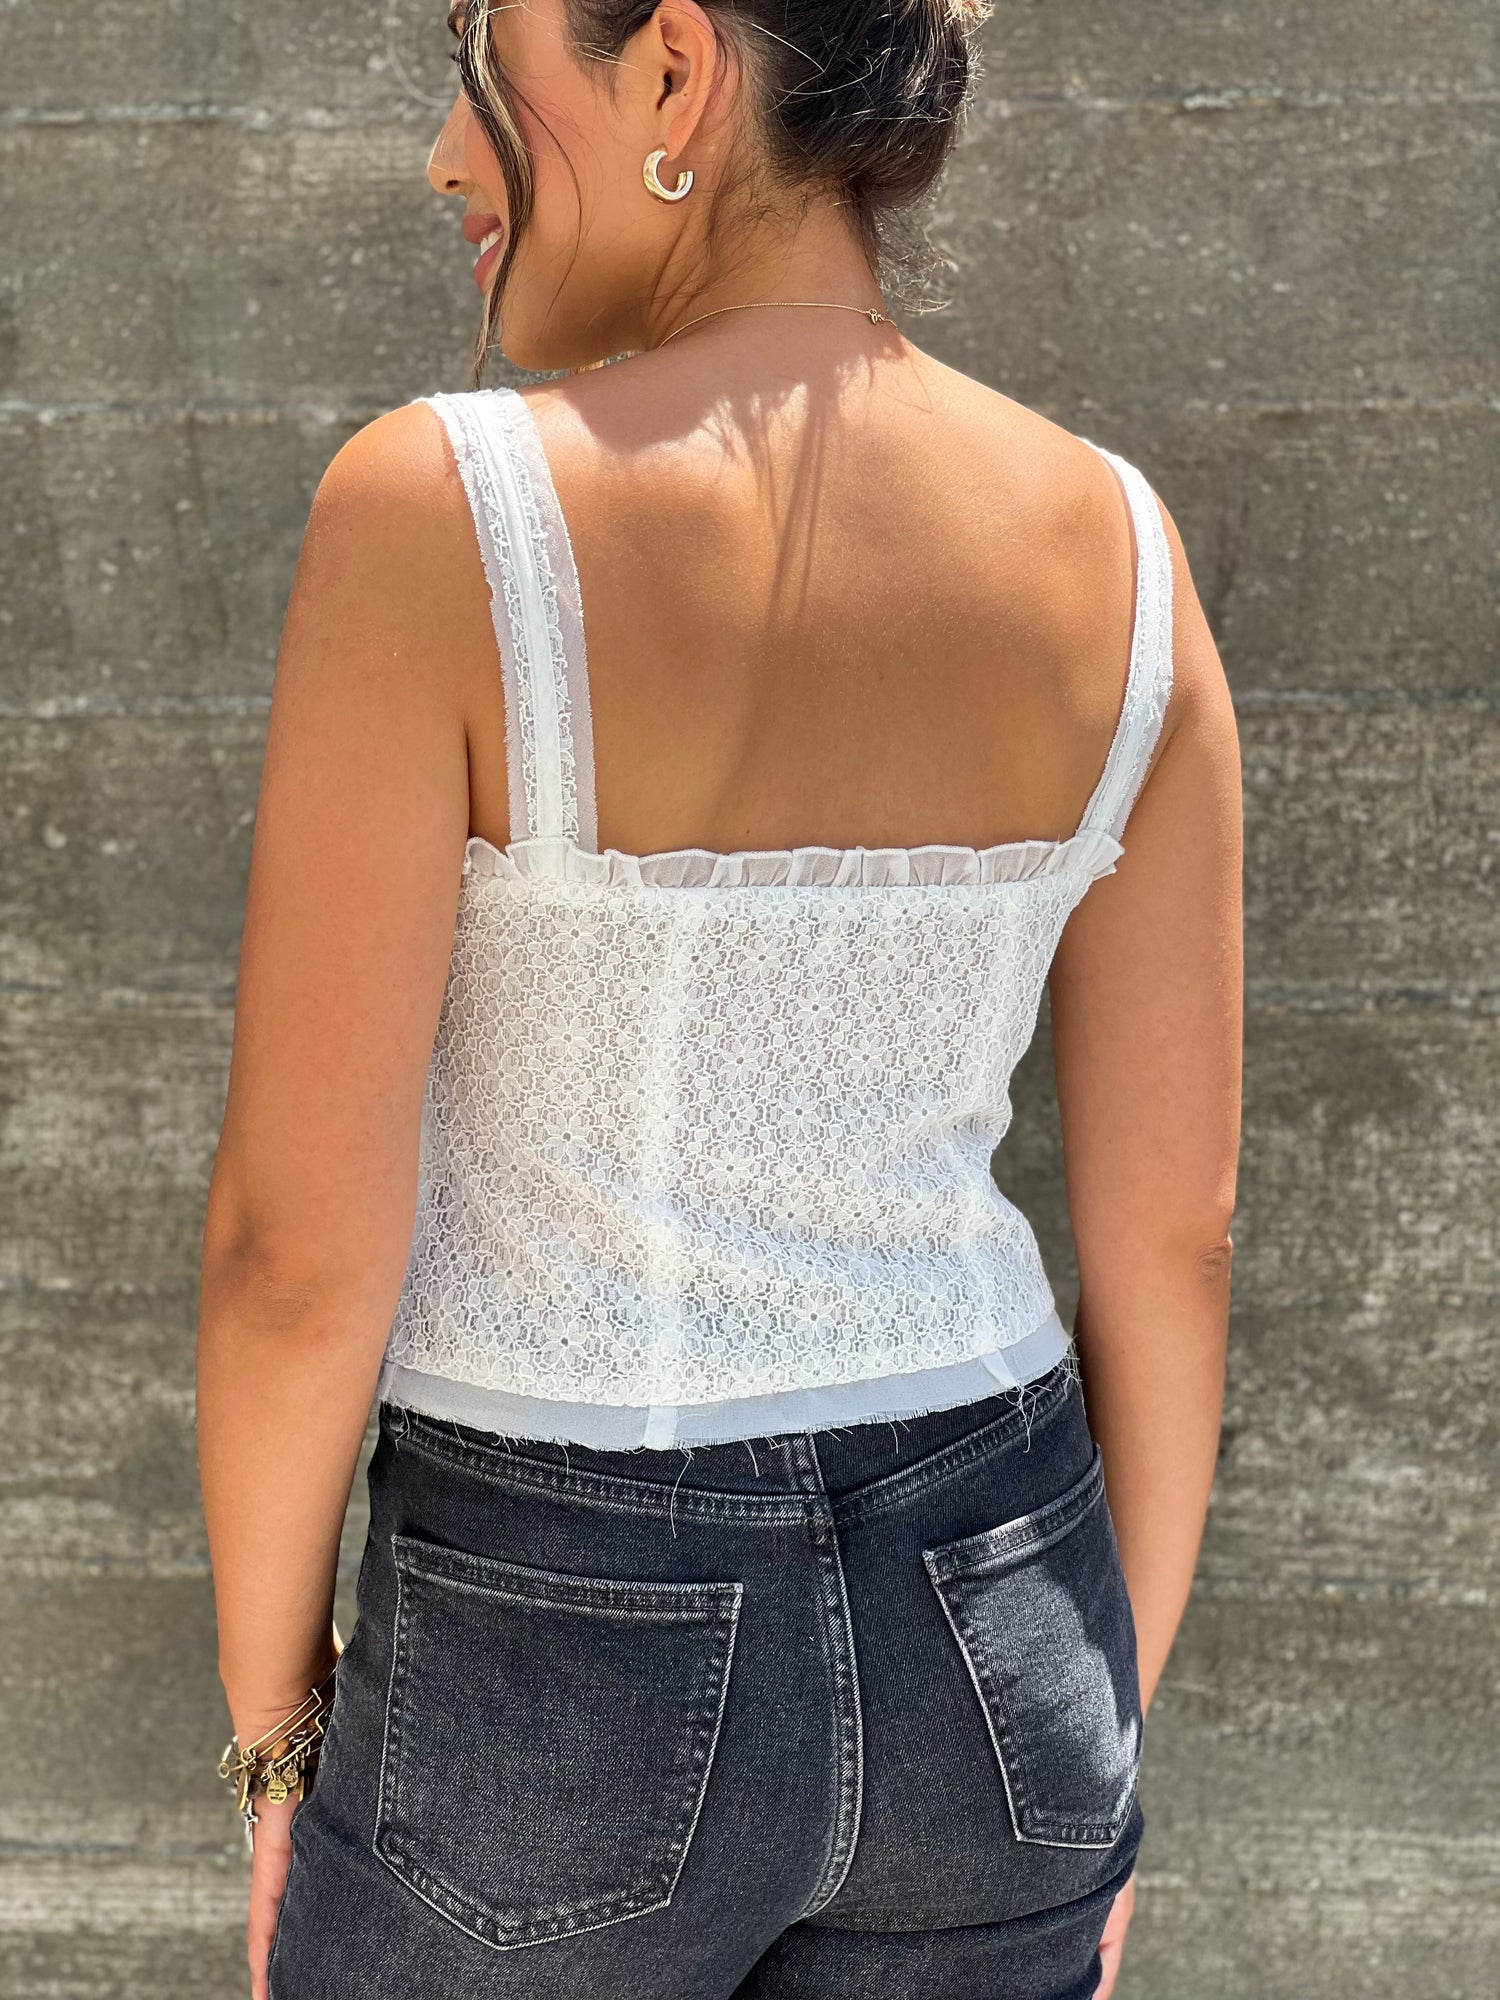 This is a closeup shot of the back of the shirt. The model is tanned skinned and wearing a white sleeveless lace top. It has a square neckline. She is wearing black jeans and has her hair in a bun. 